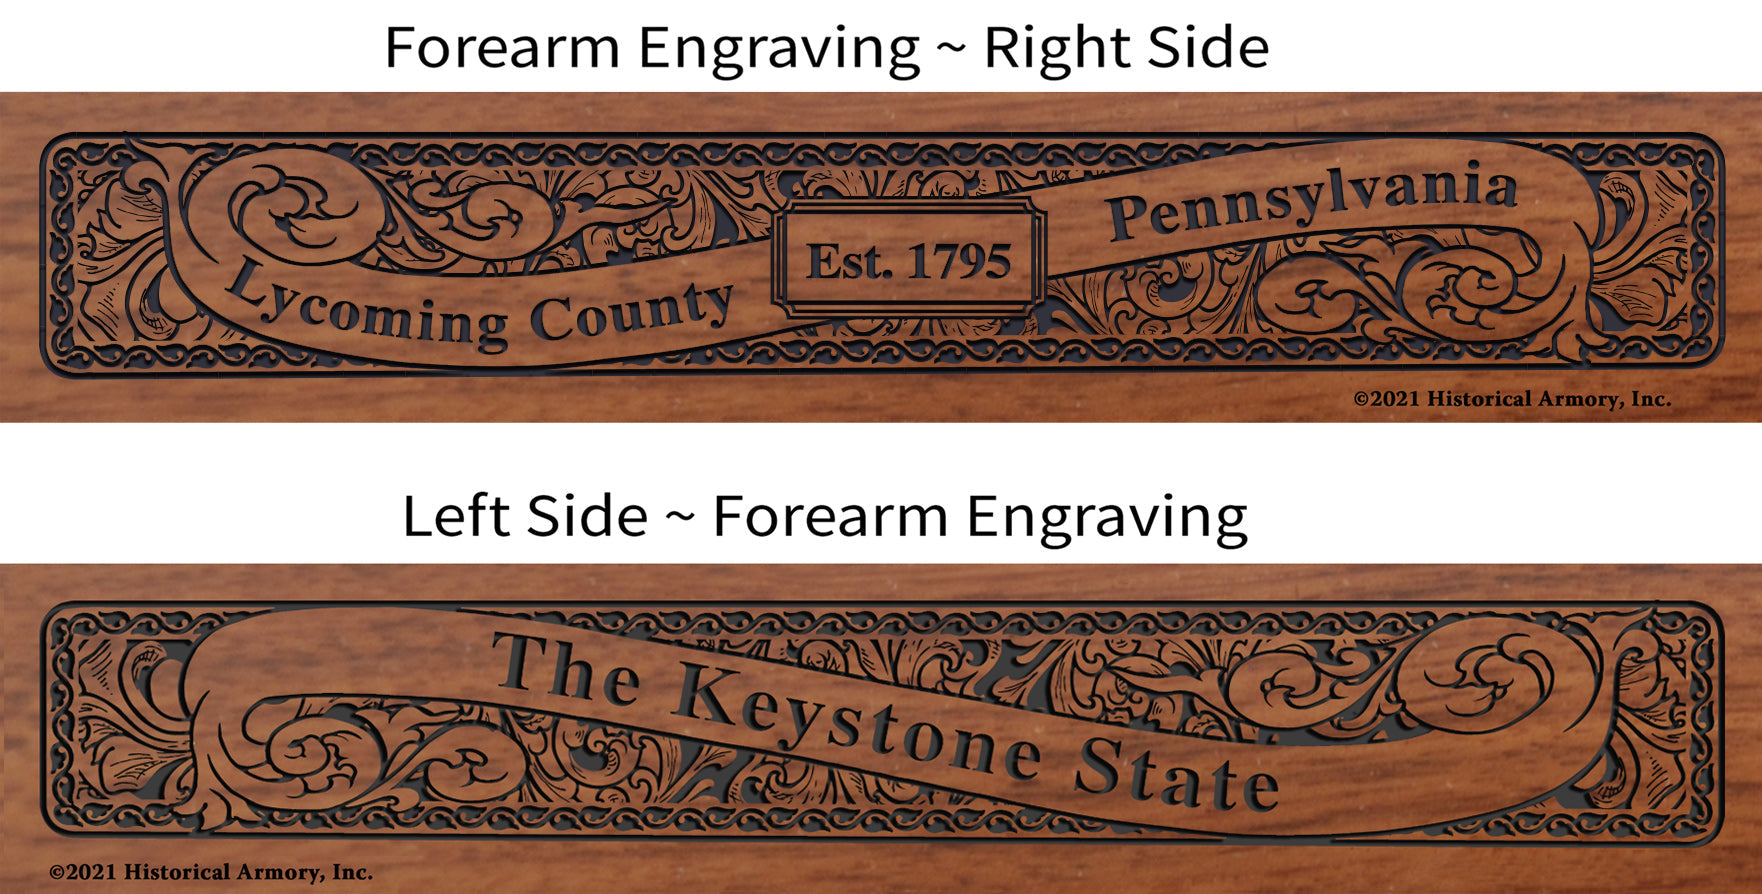 Lycoming County Pennsylvania Engraved Rifle Forearm